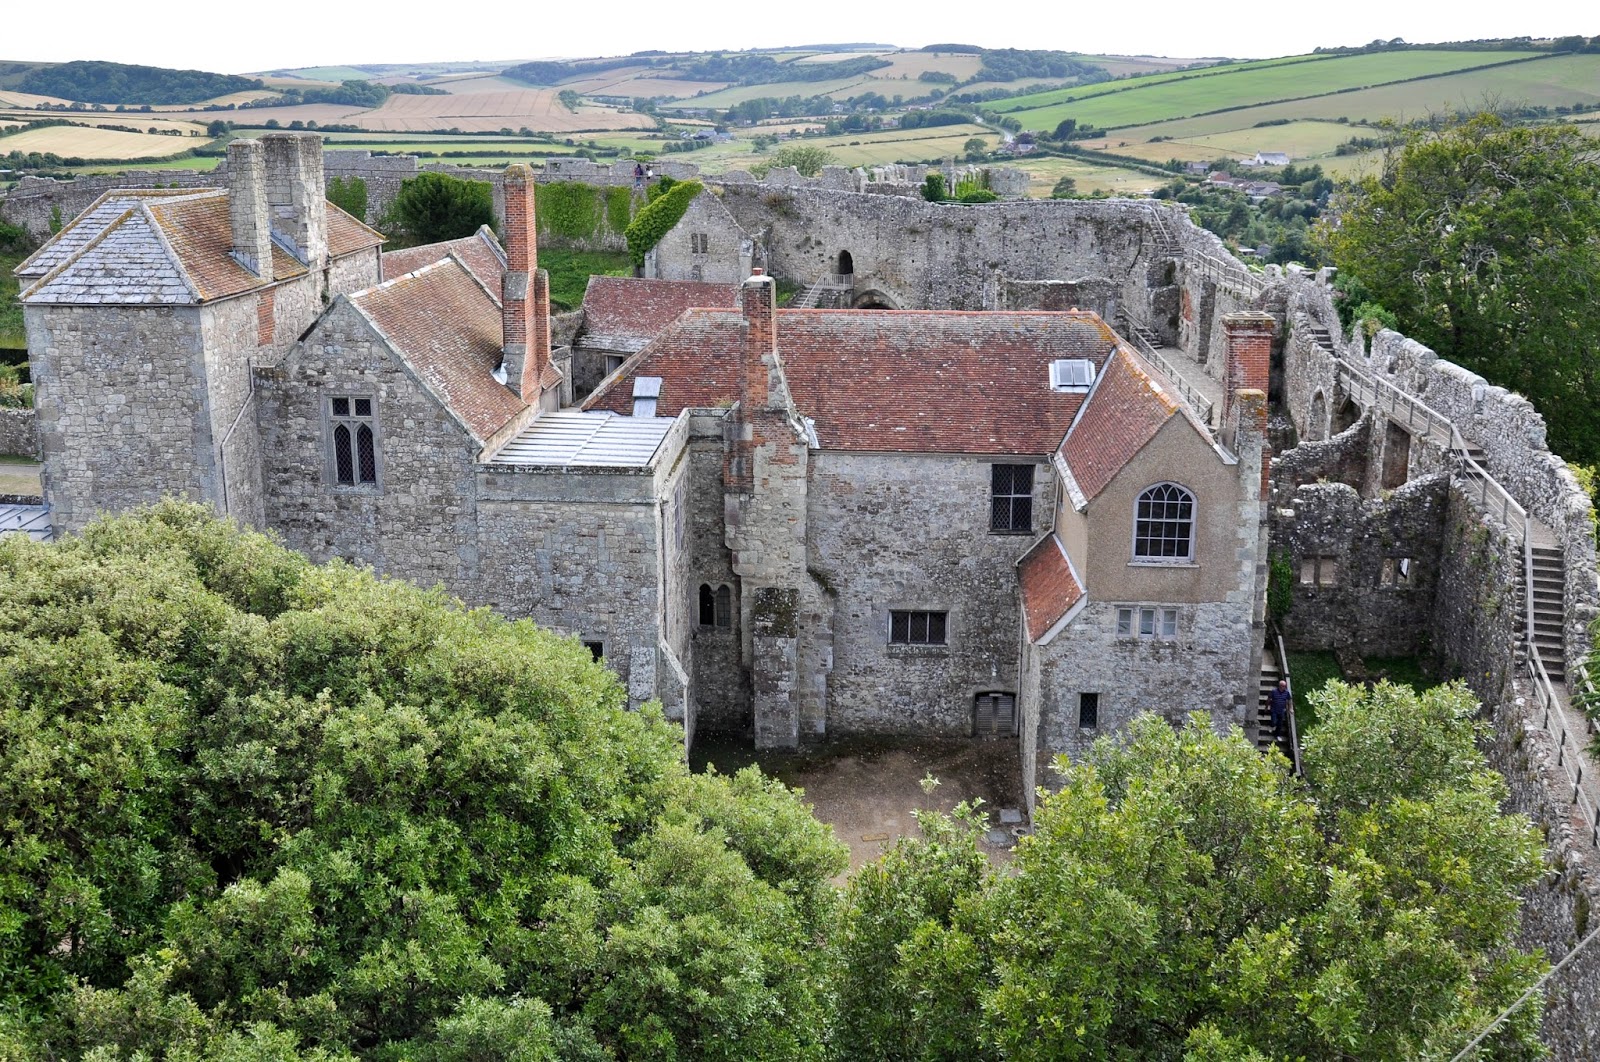 Looking down the keep, Carisbrook Castle, Isle of Wight, UK - www.rossiwrites.com